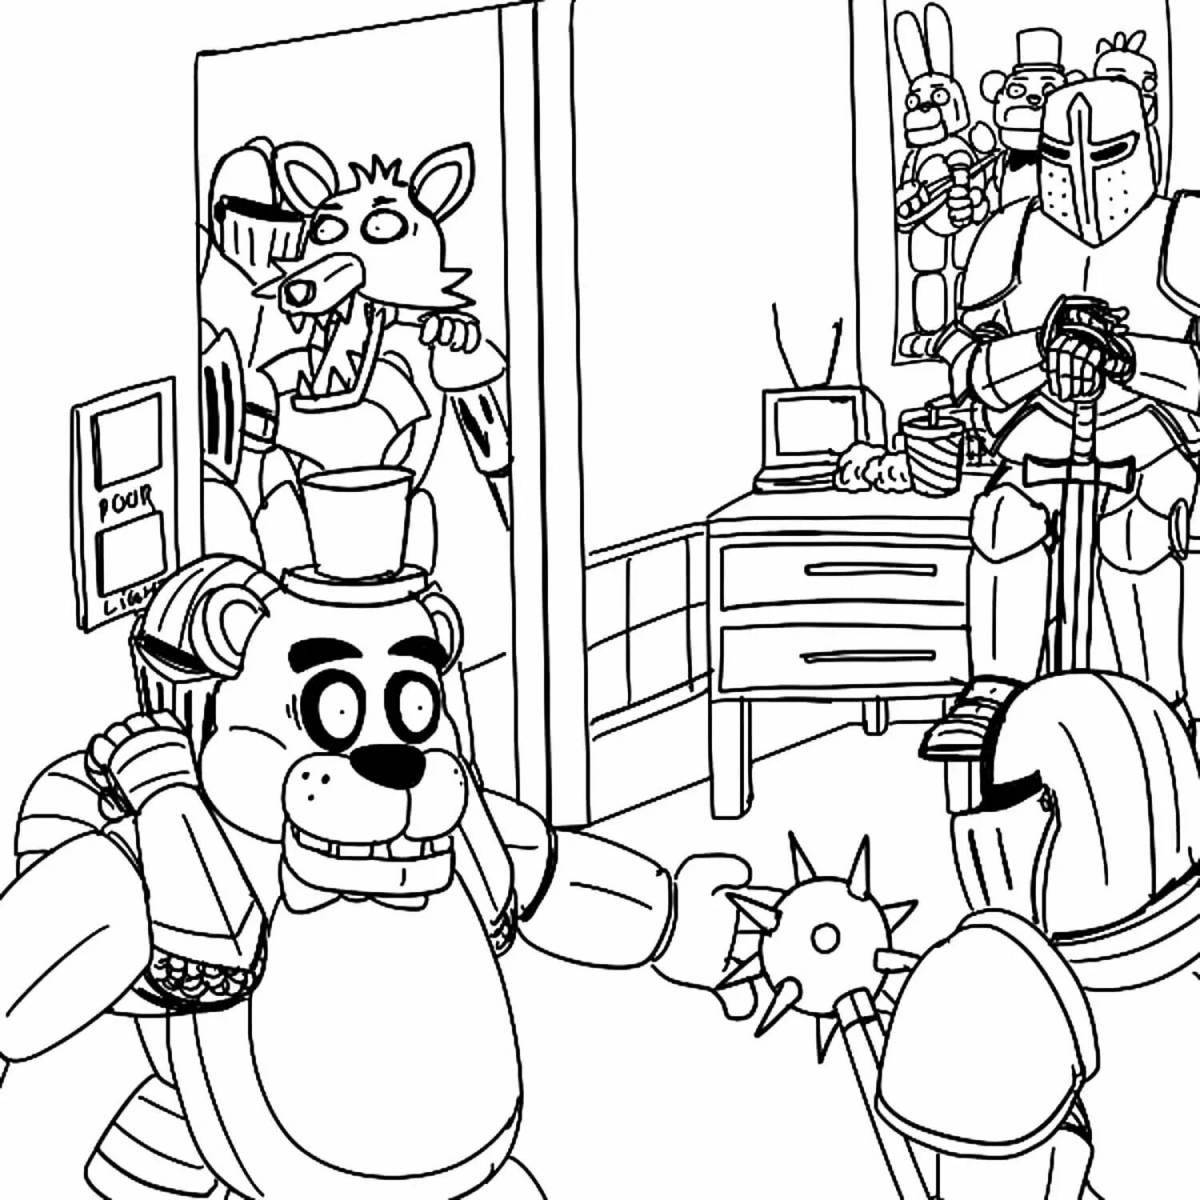 Привлечение five nights at freddy's coloring page